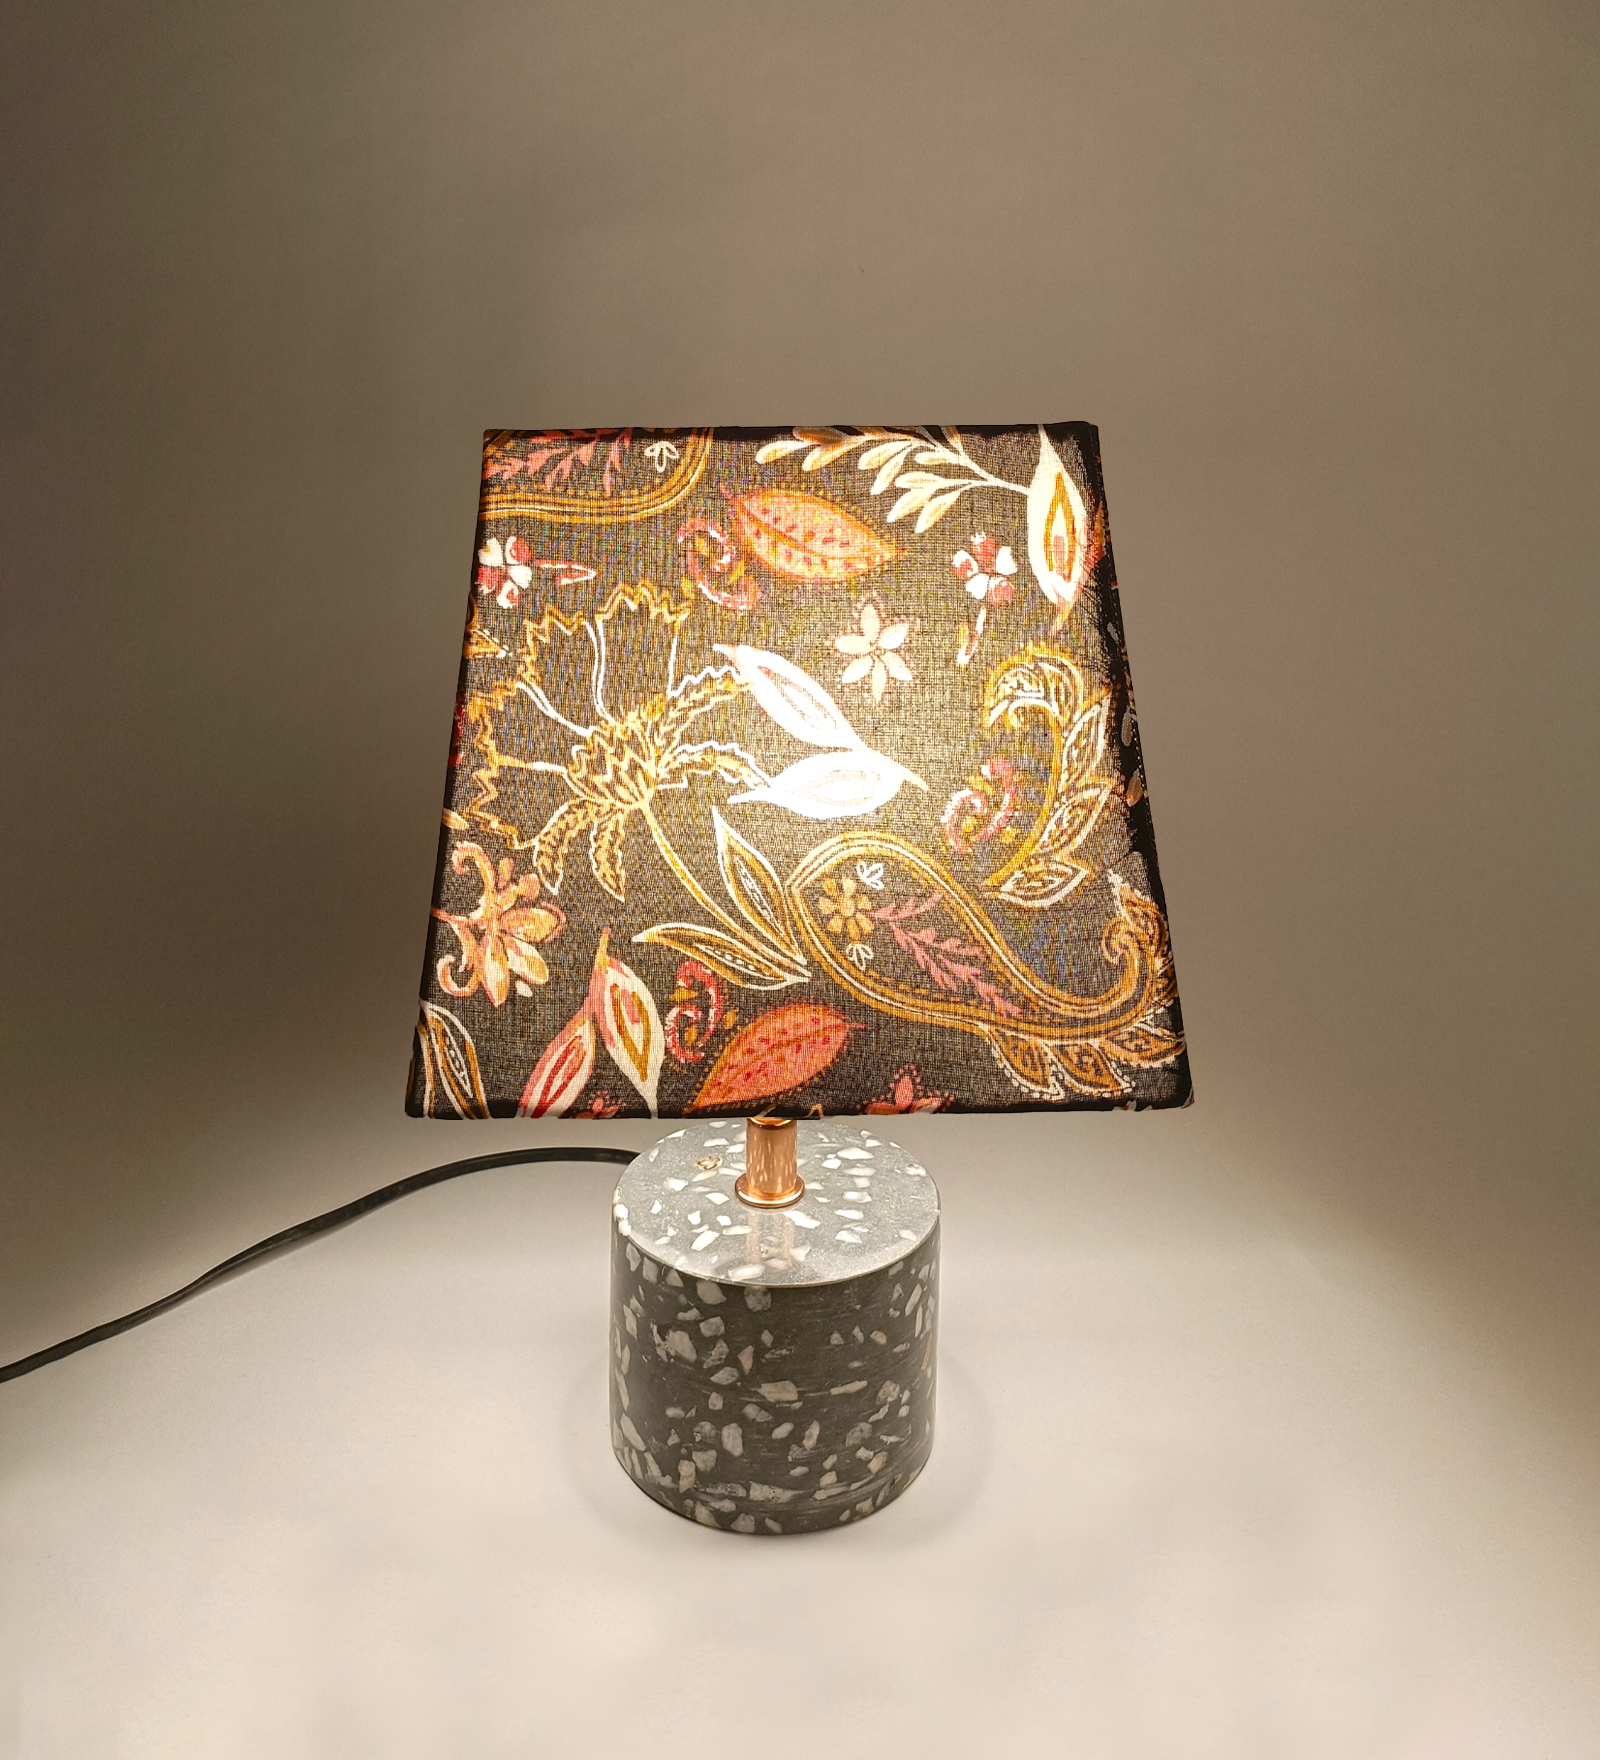 Alluring Marble Table lamp